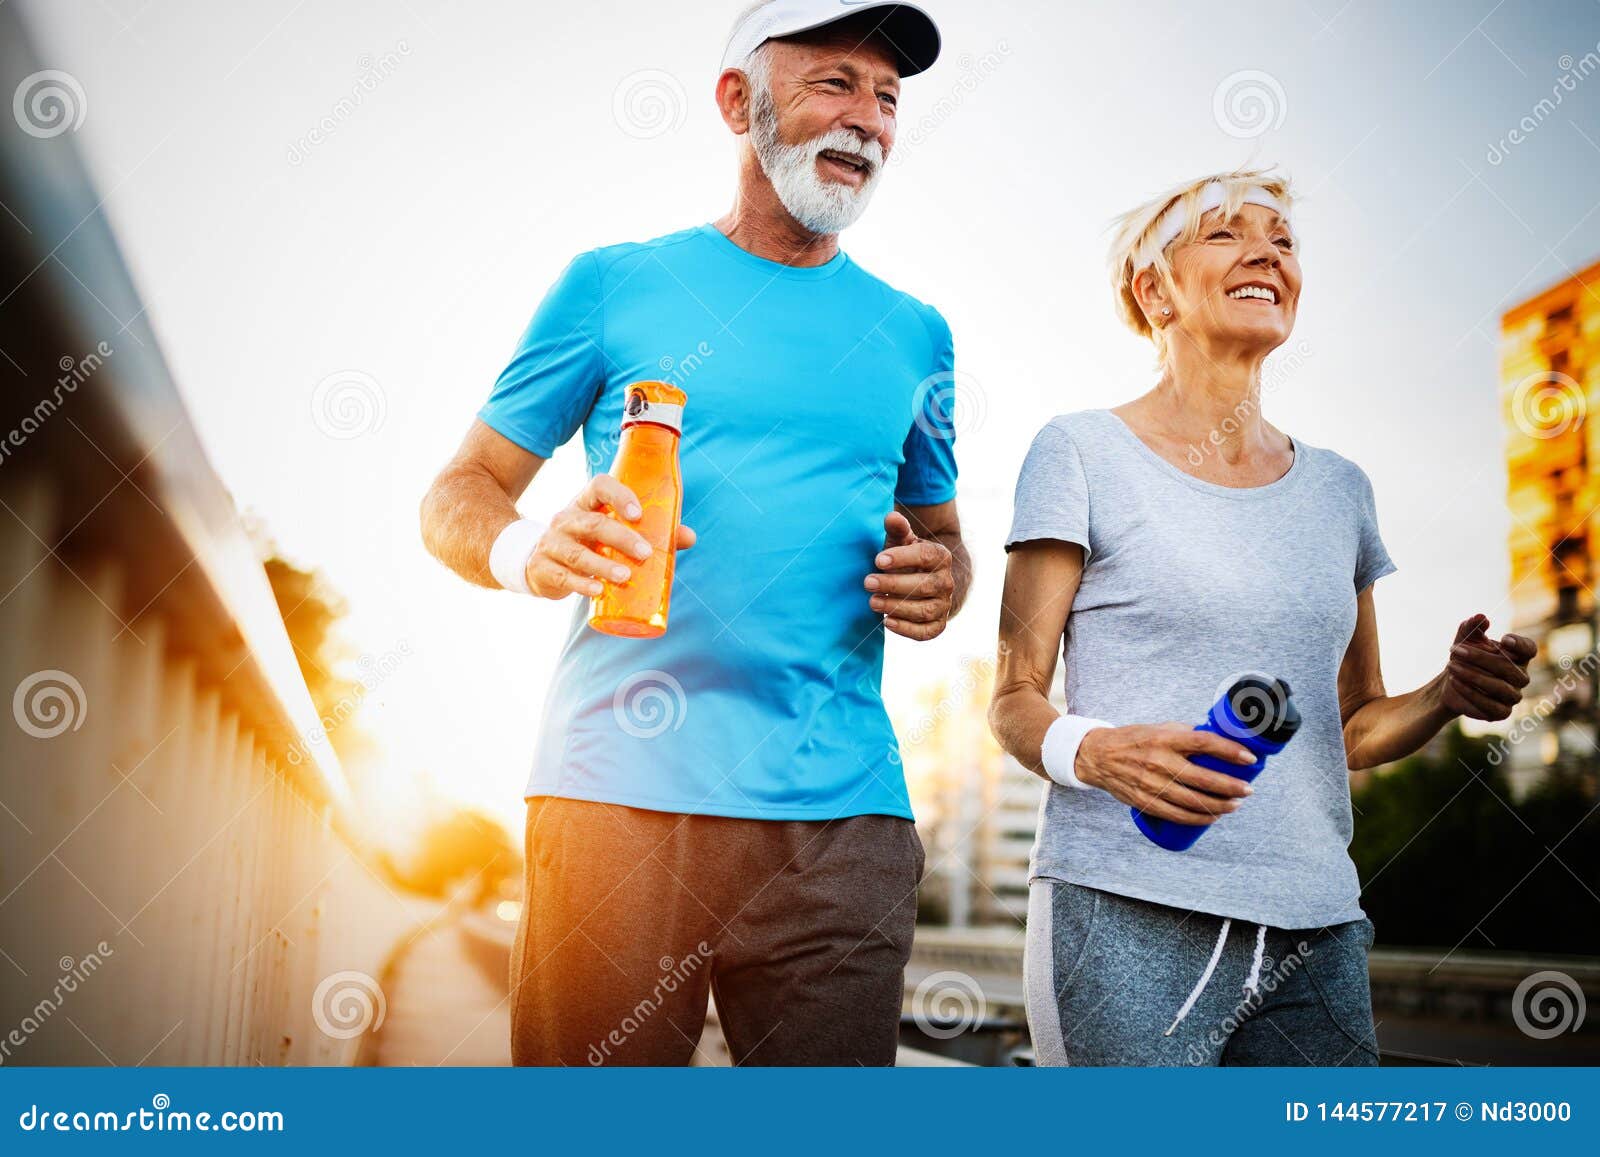 happy senior couple staying fit by sport running